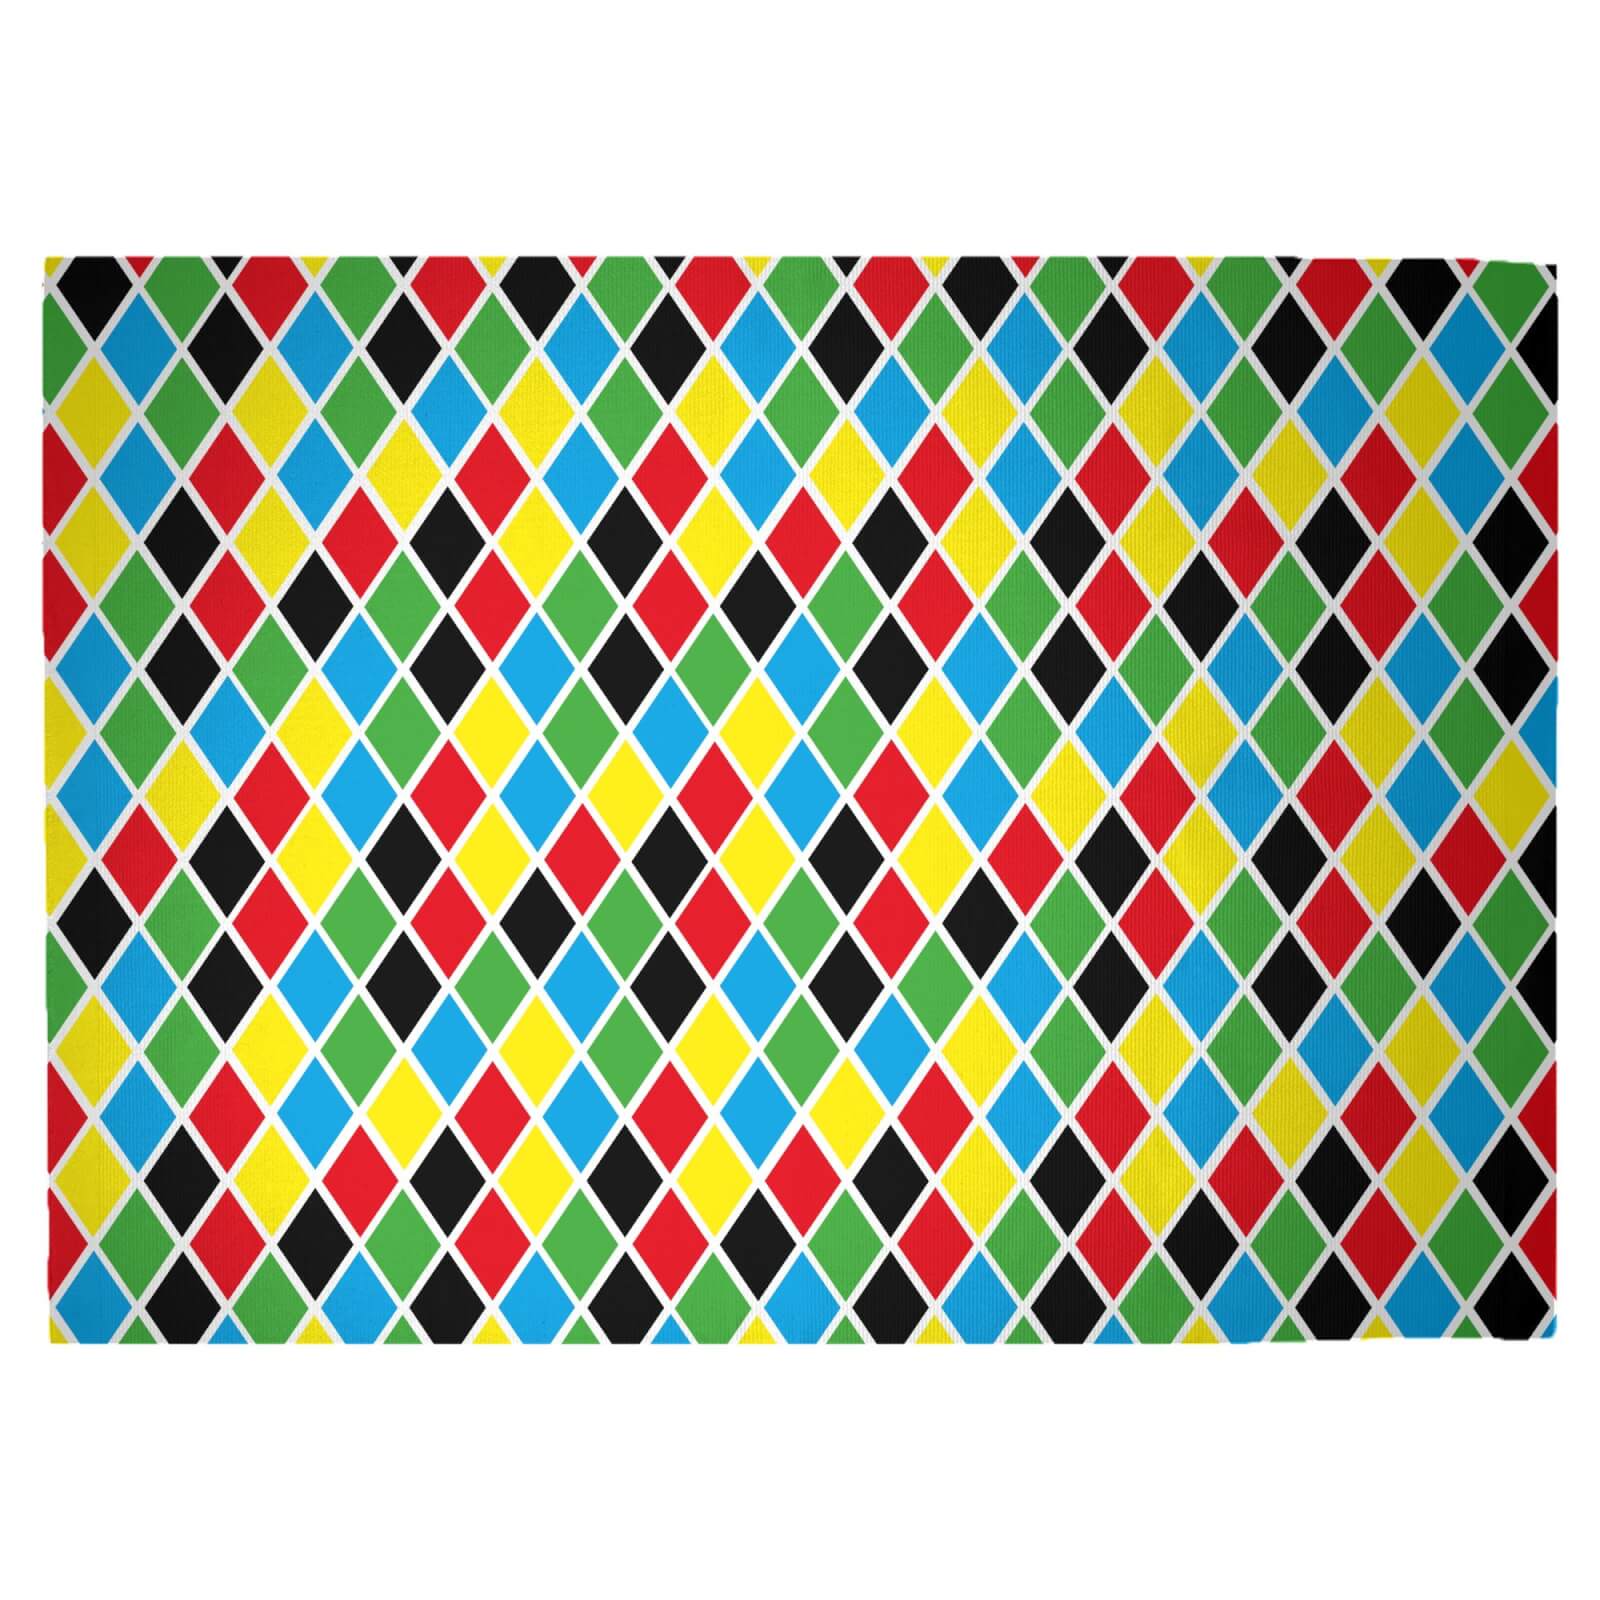 Clown Pattern Woven Rug - Large